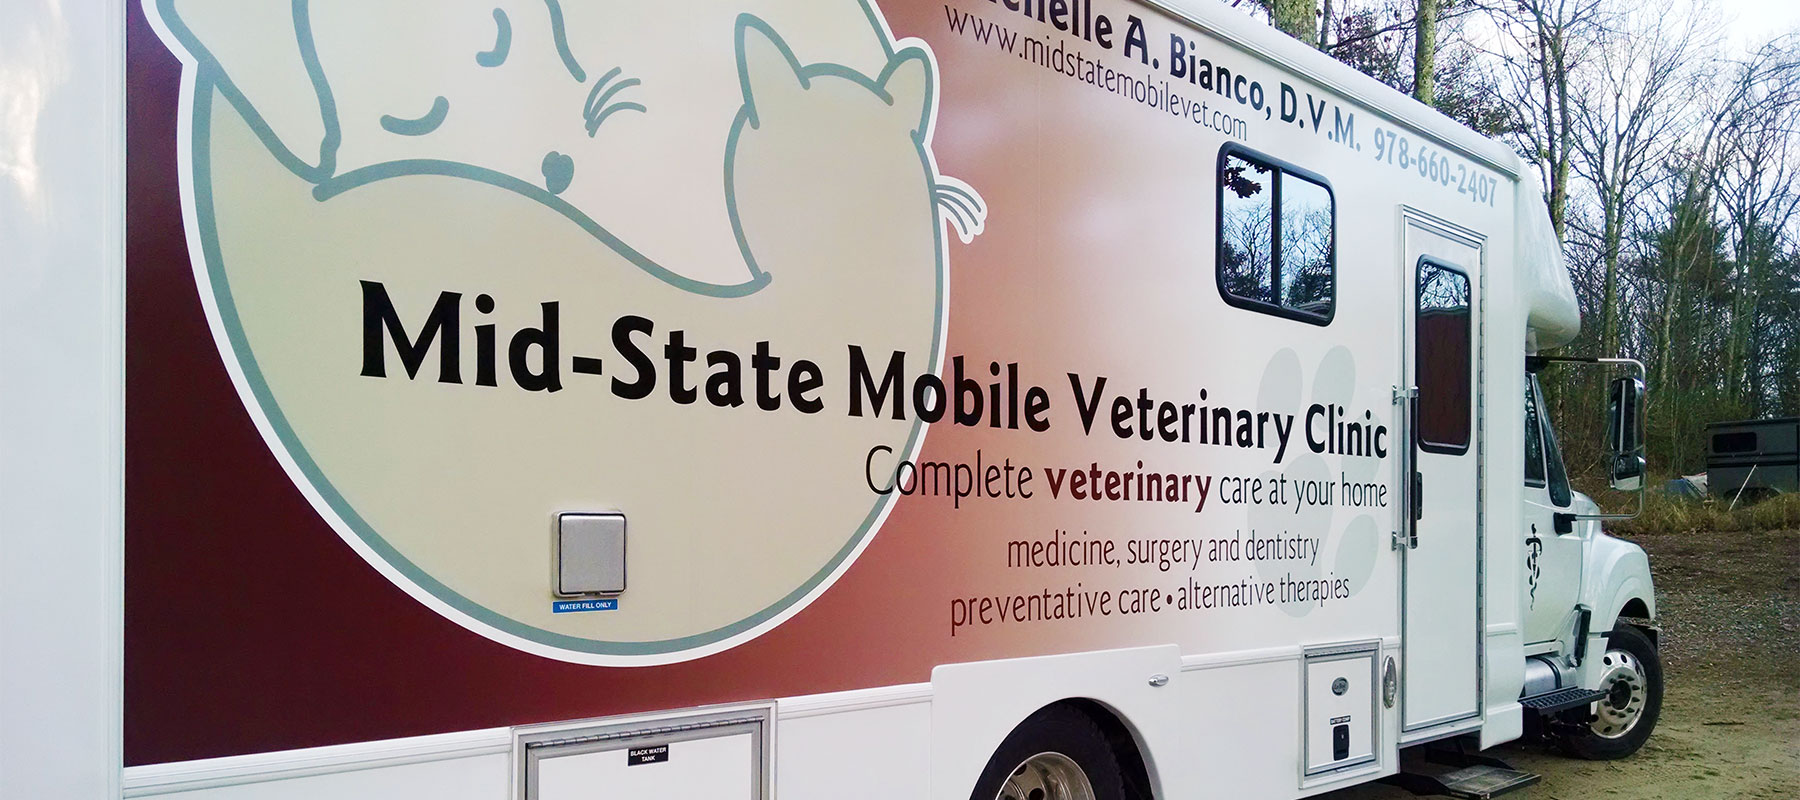 Mid-State Mobile Veterinary Clinic Van